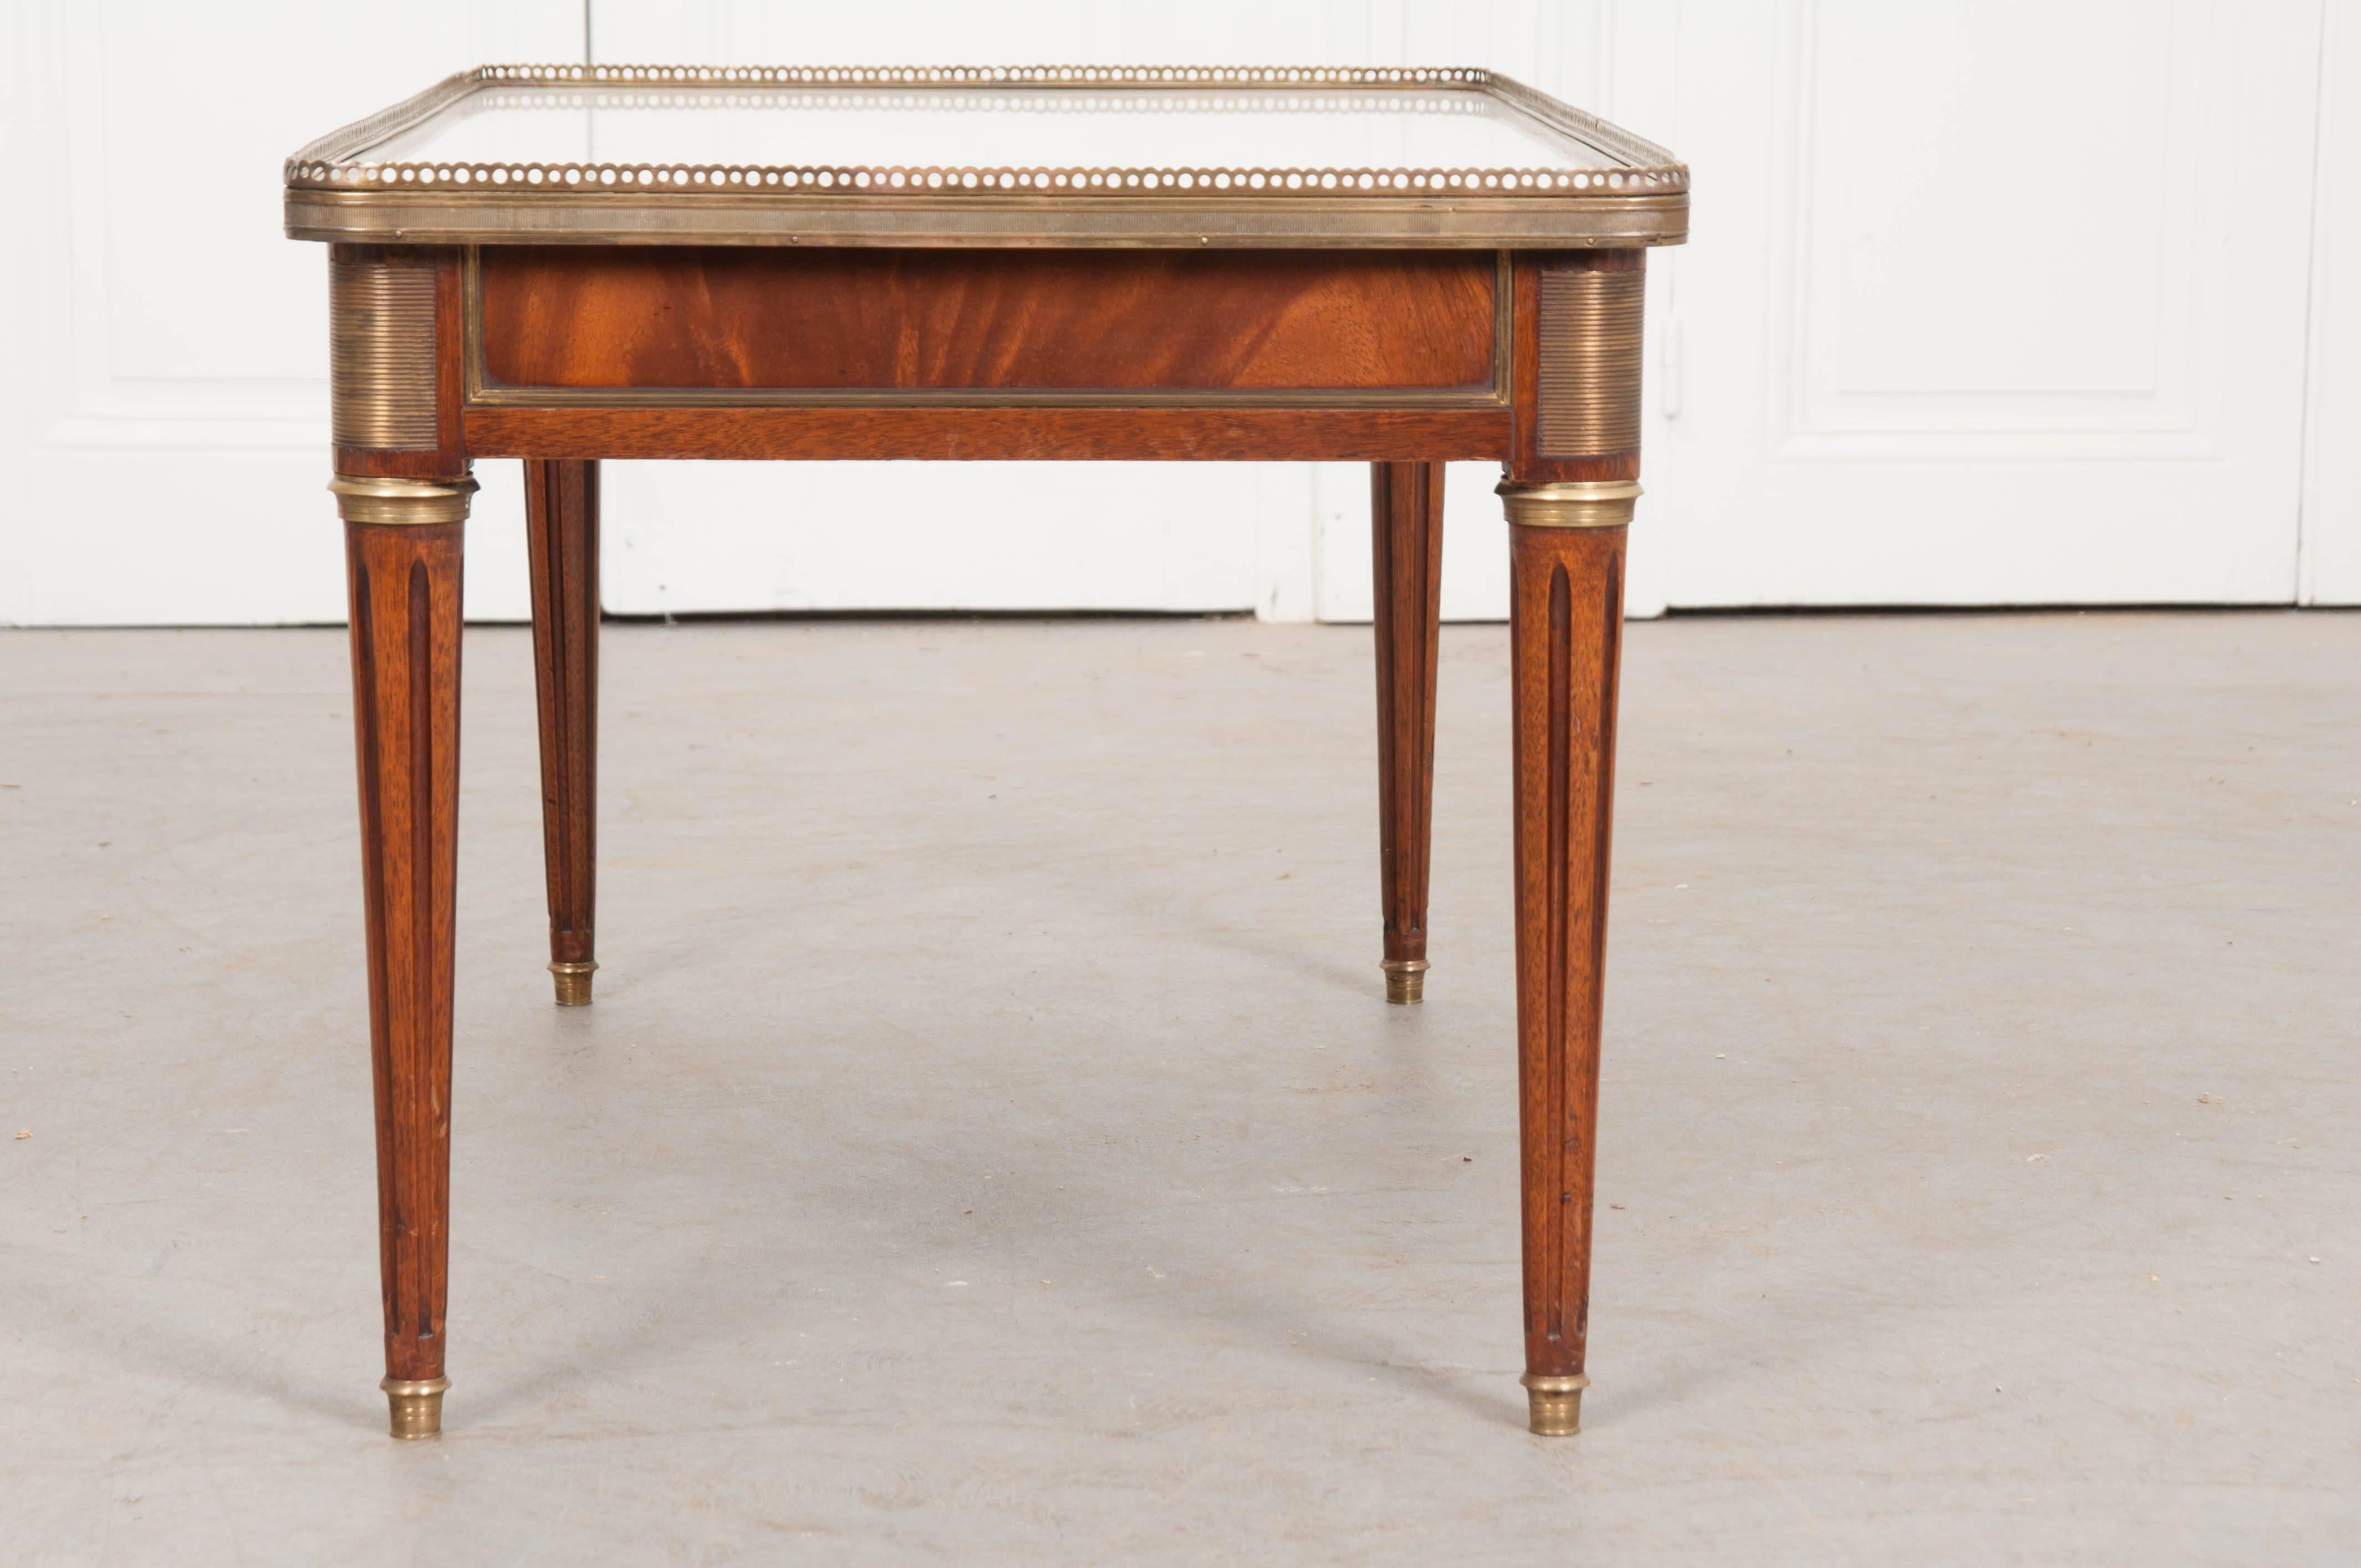 20th Century French Mahogany Louis XVI Style Coffee Table with Marble Top